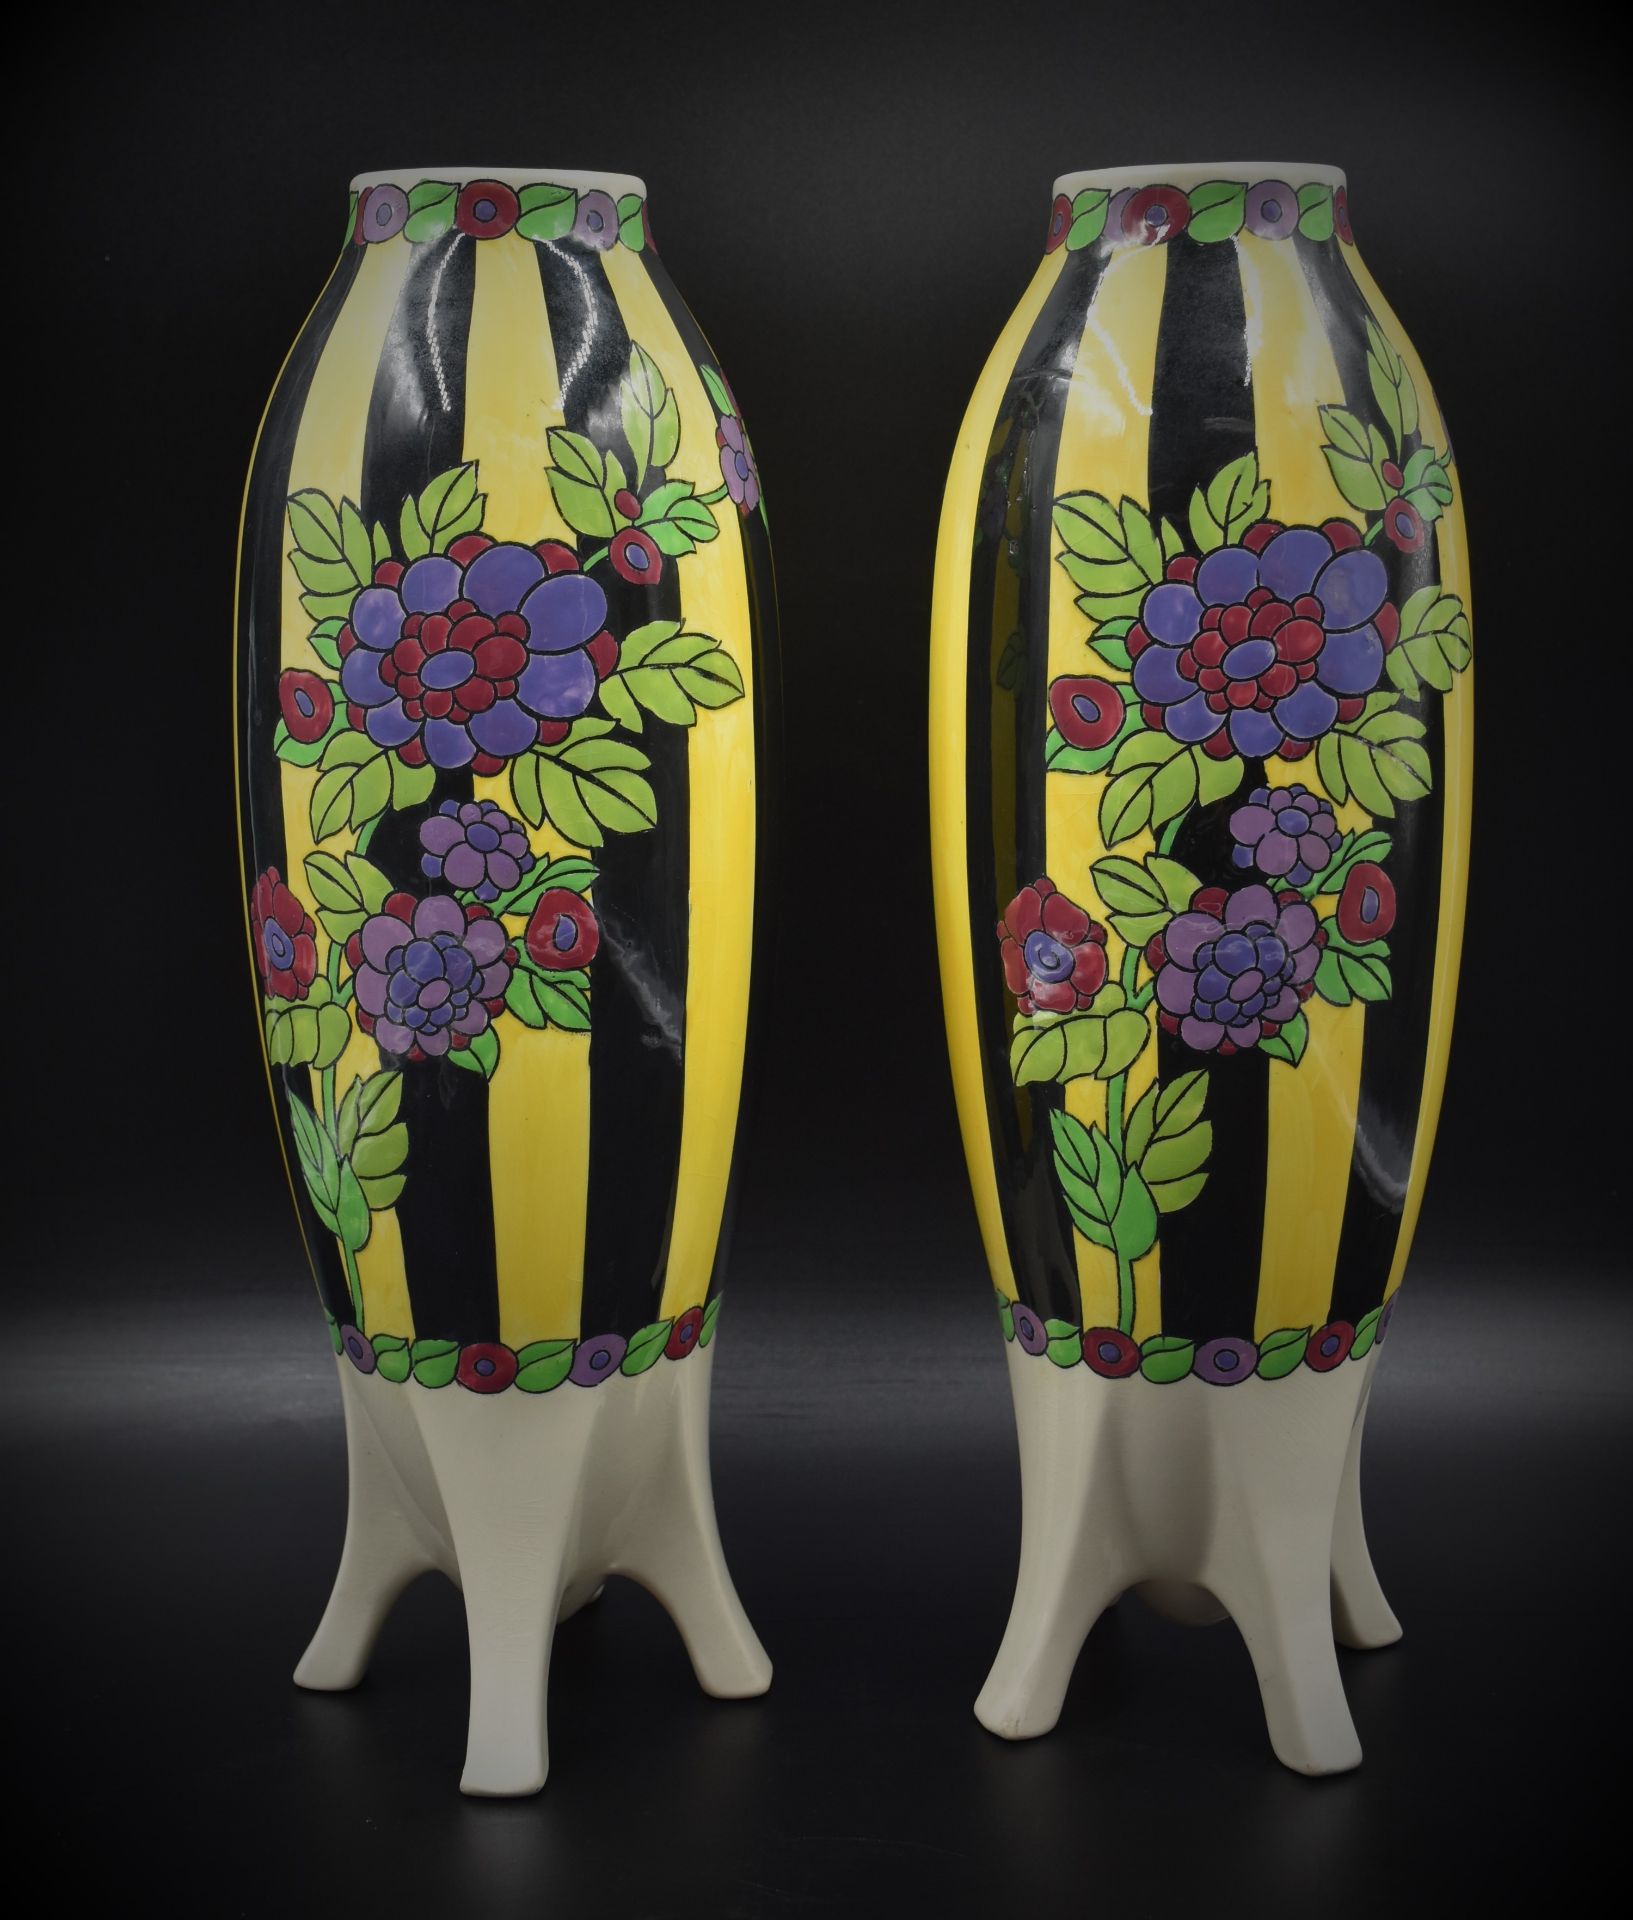 Pair of Boch Kéramis vases decorated with flowers on yellow and black horizontal bands. Spindle